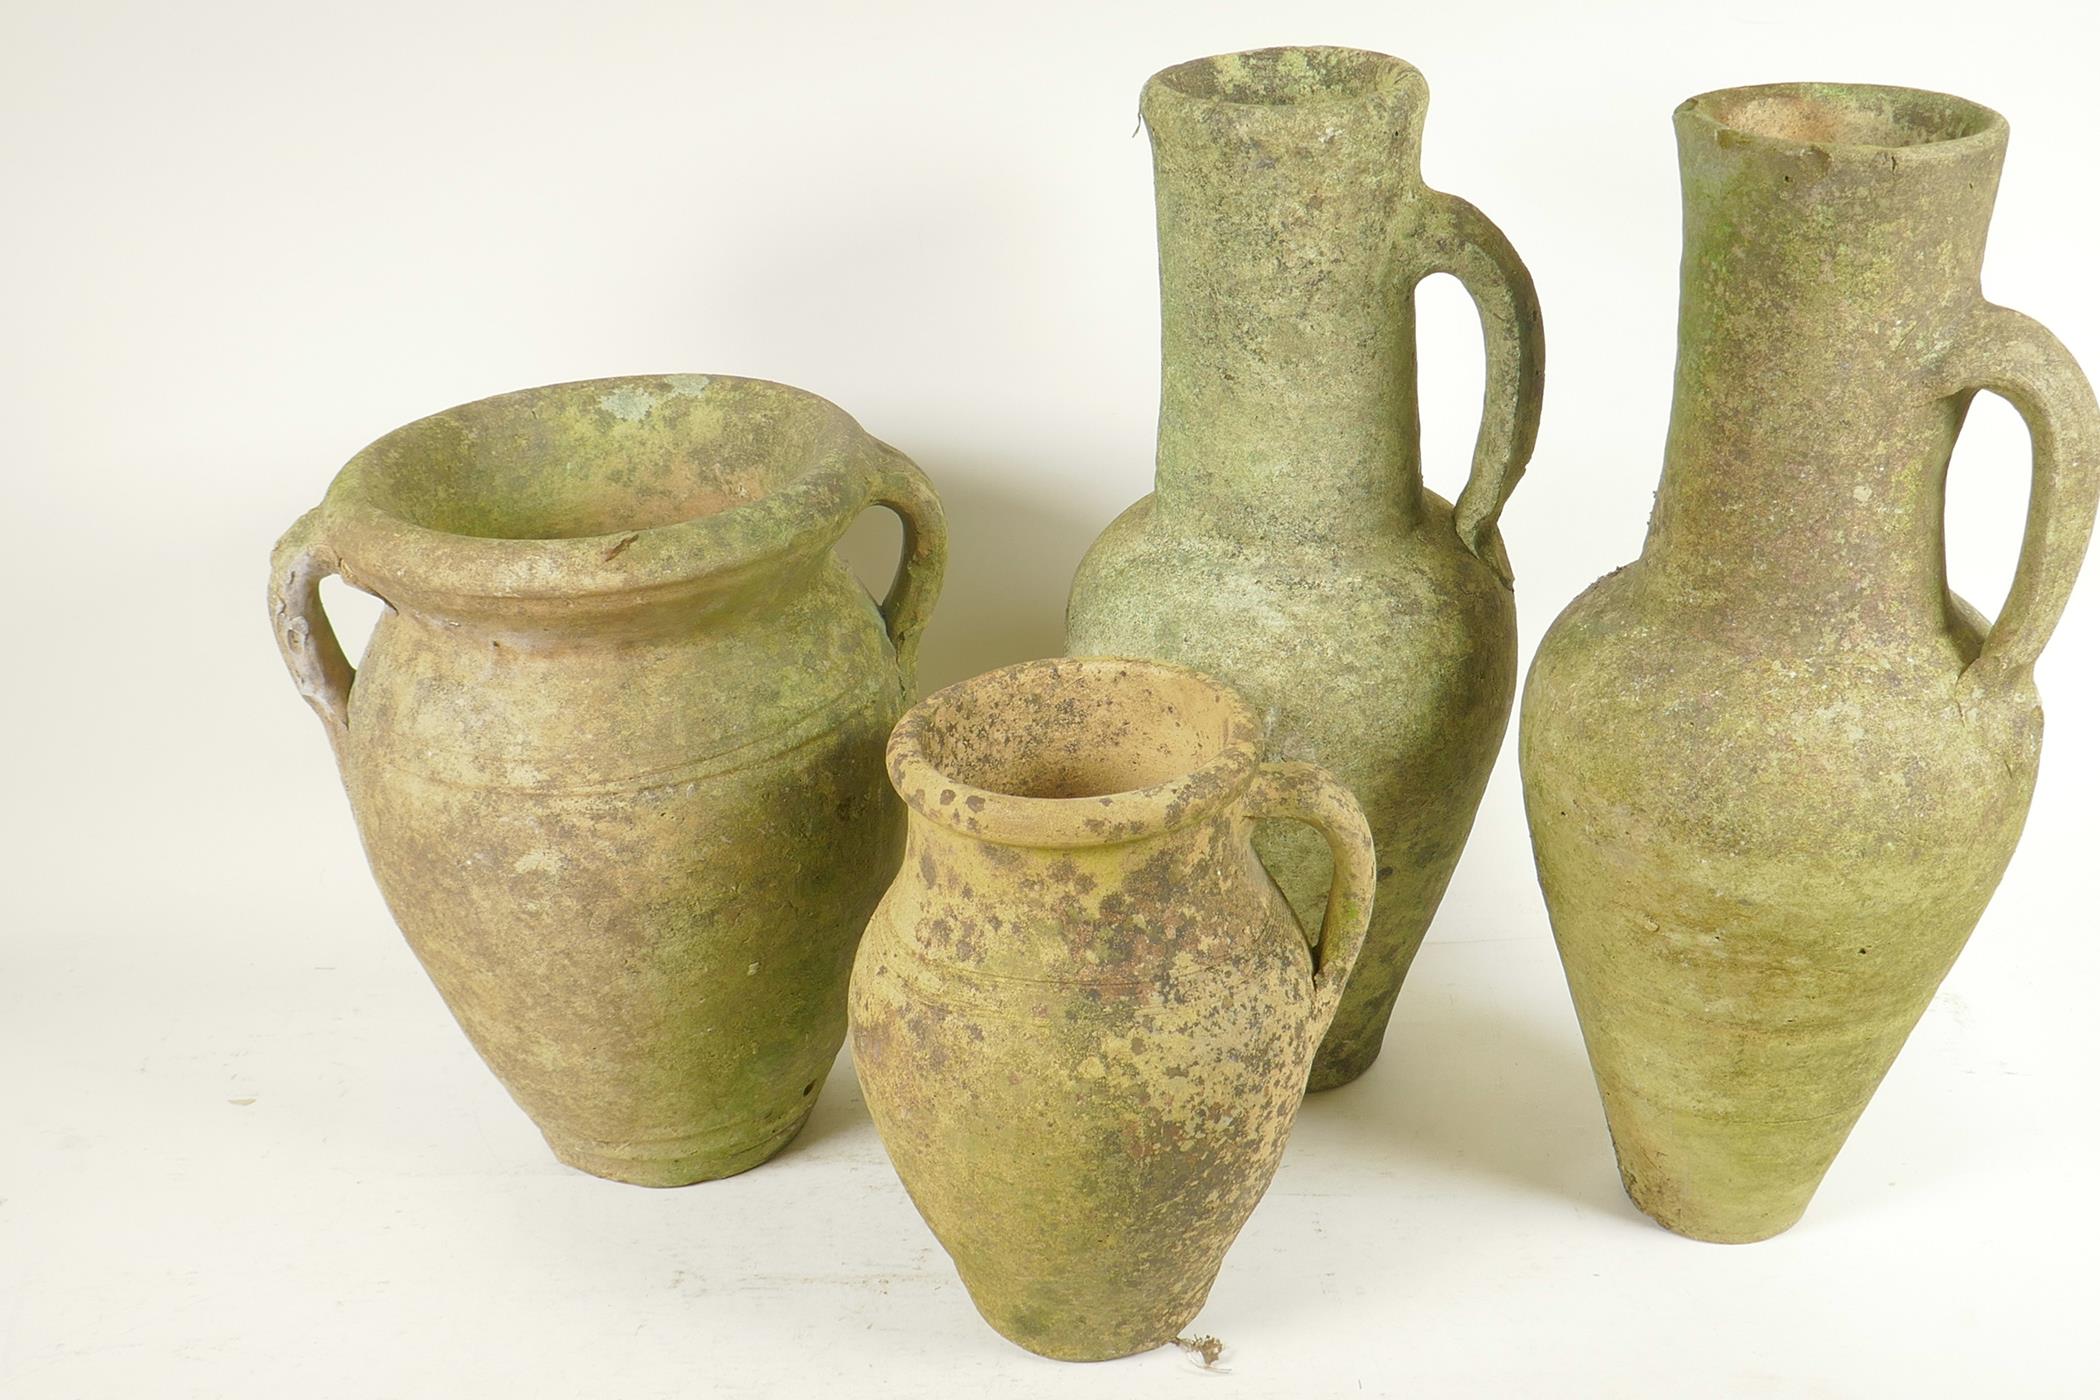 Four terracotta garden ornaments, a pair of Grecian style jugs, 15" high, a two handled vase and a